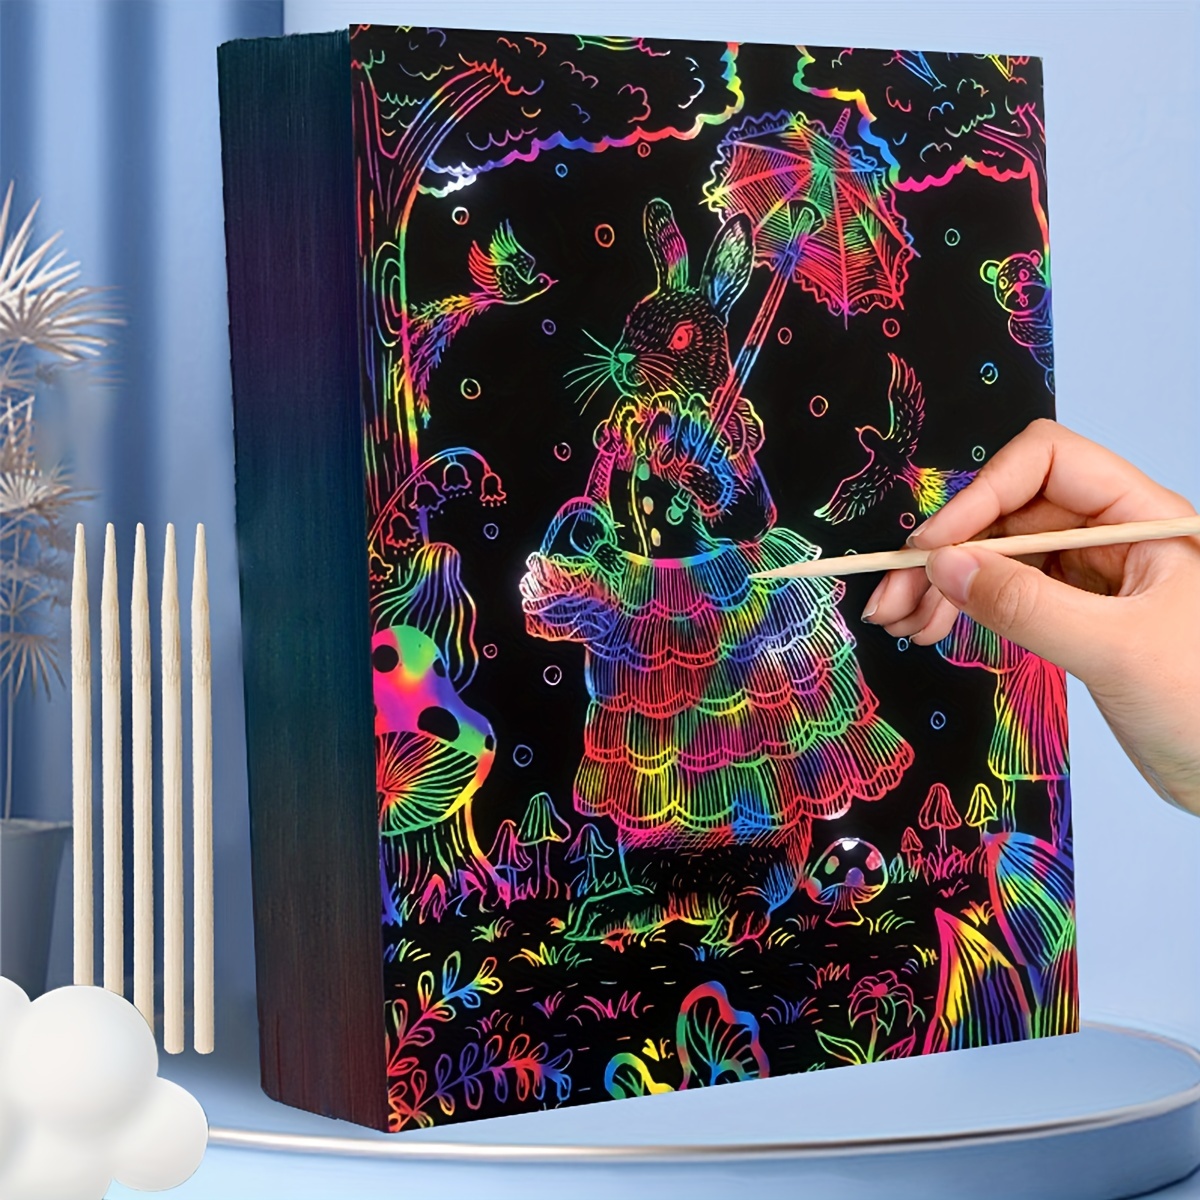 DIY Magic Rainbow Color Scratch Art Paper Card Set With Graffiti Stencil  Drawing Board Stick Art Painting Educational Toys Gifts